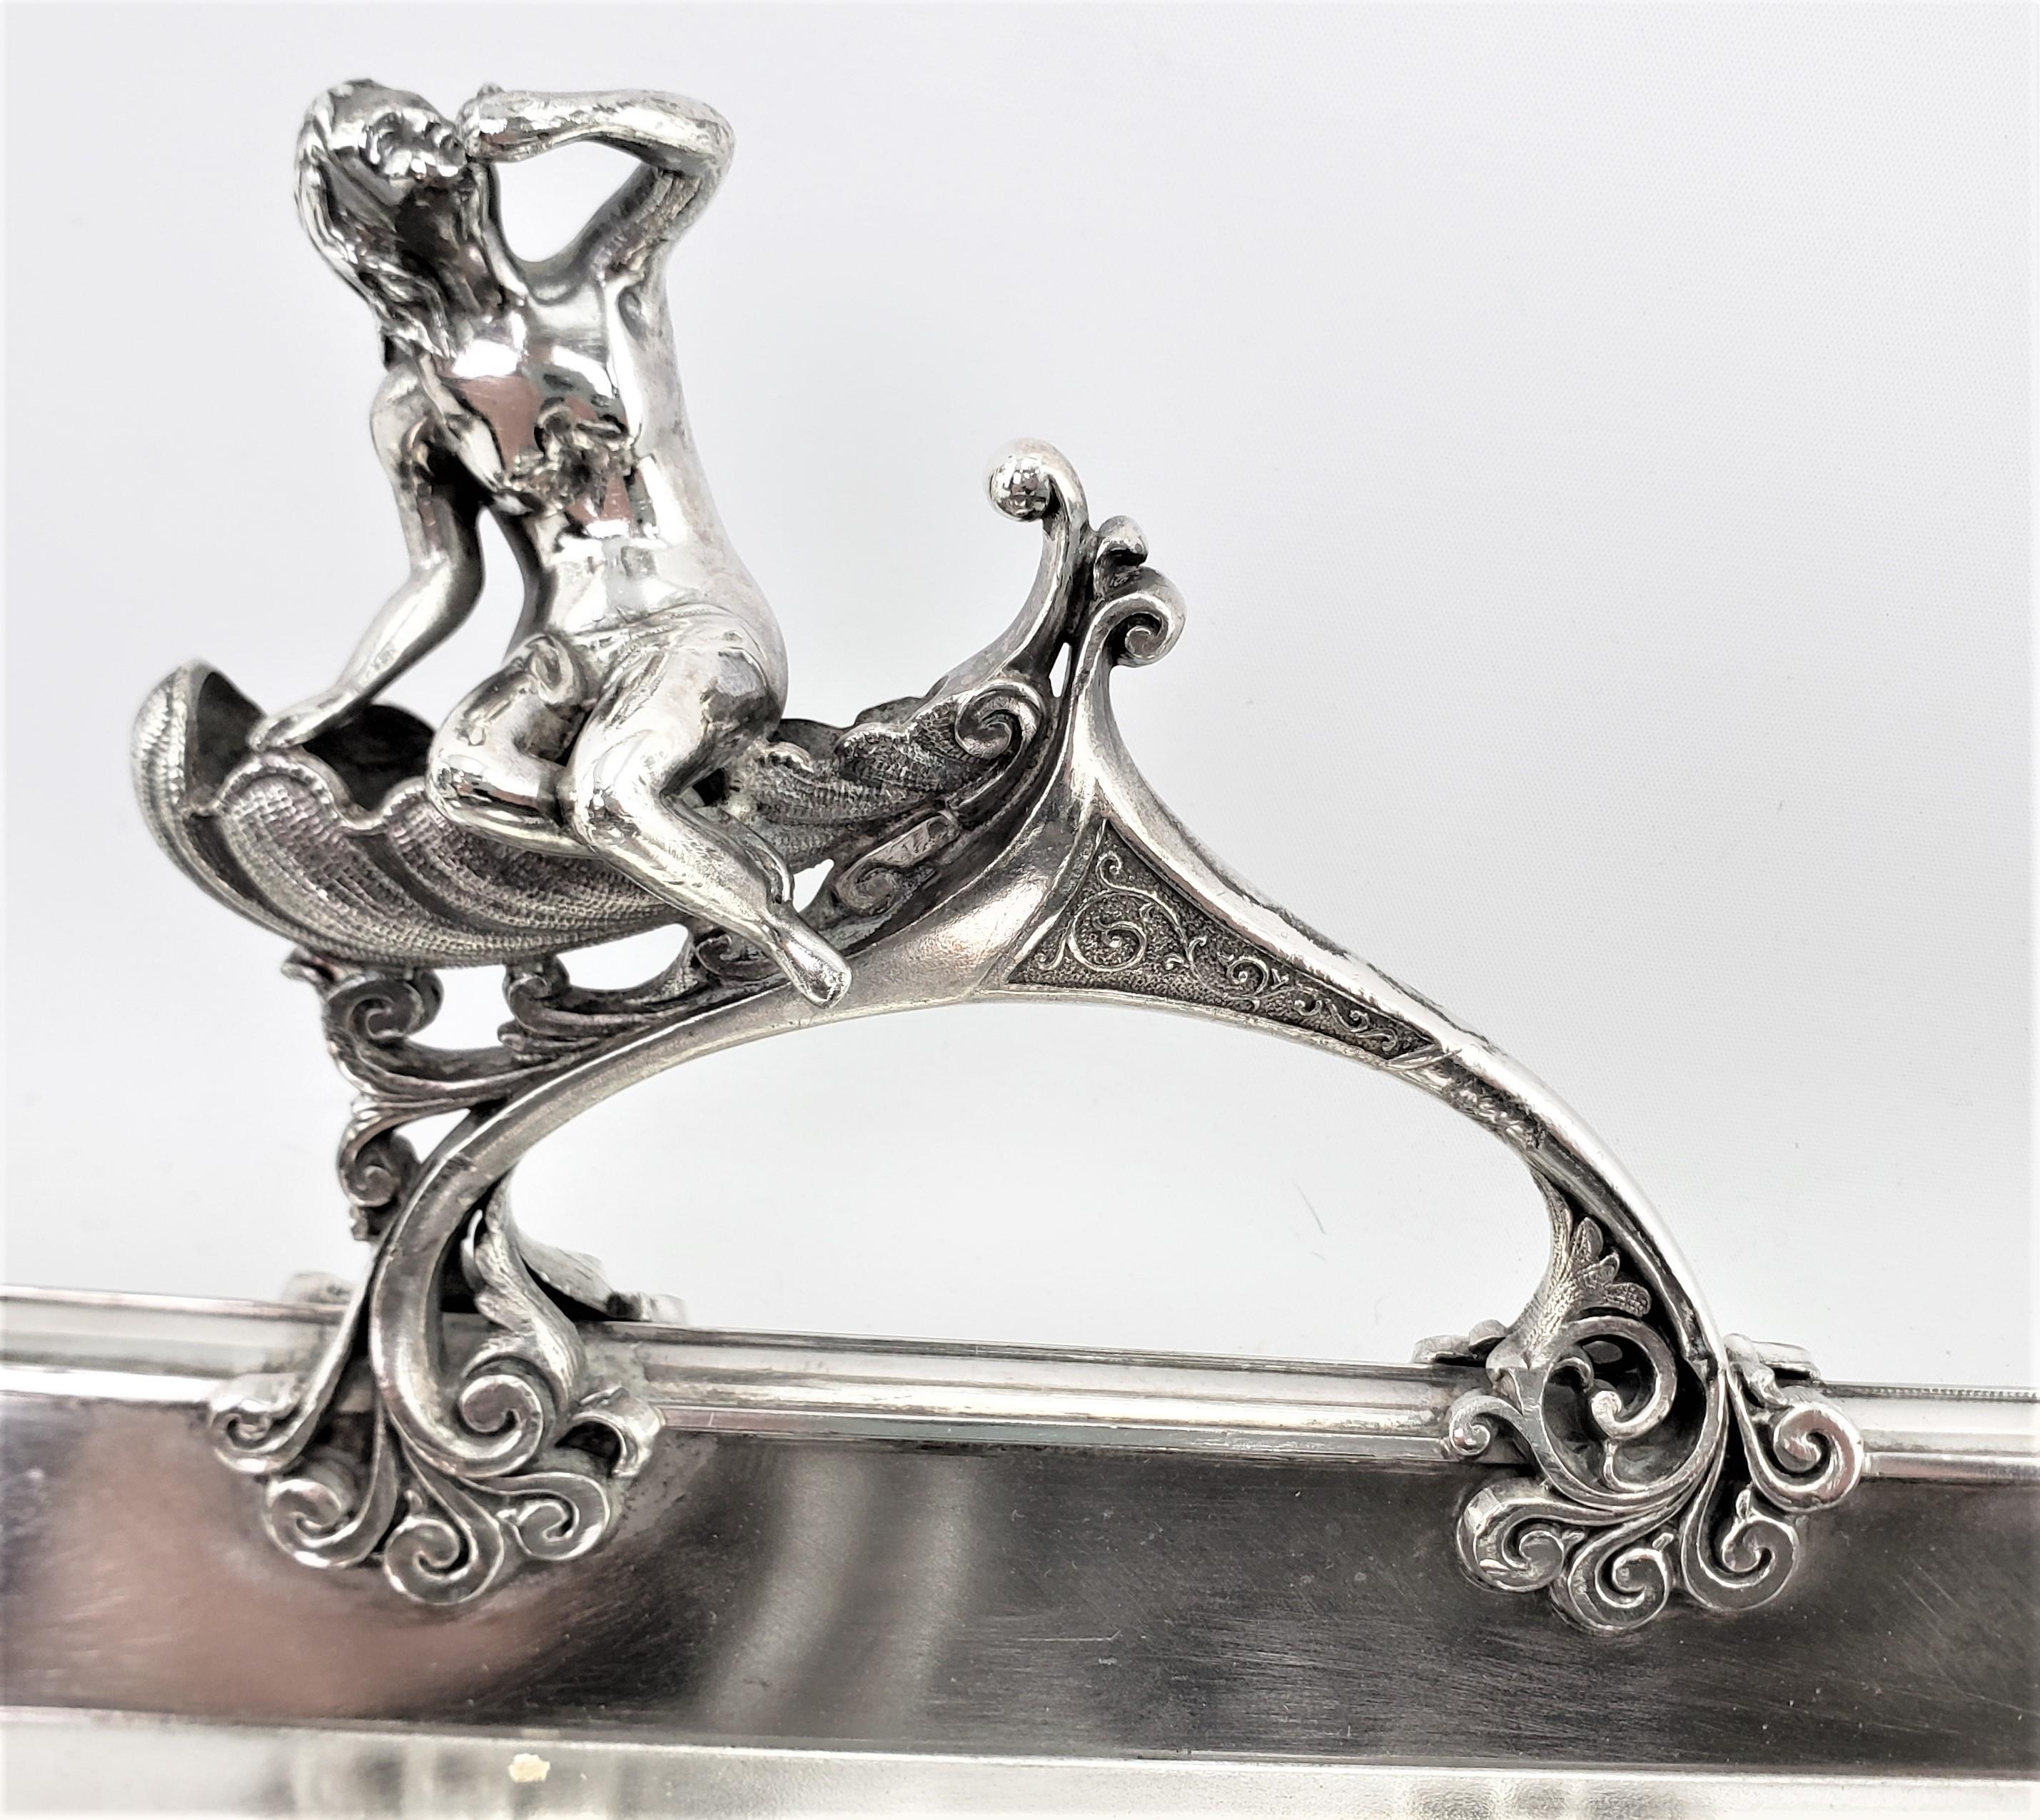 Antique Aesthetic Movement Silver Plated Serving Tray with Figural Siren Handles For Sale 2